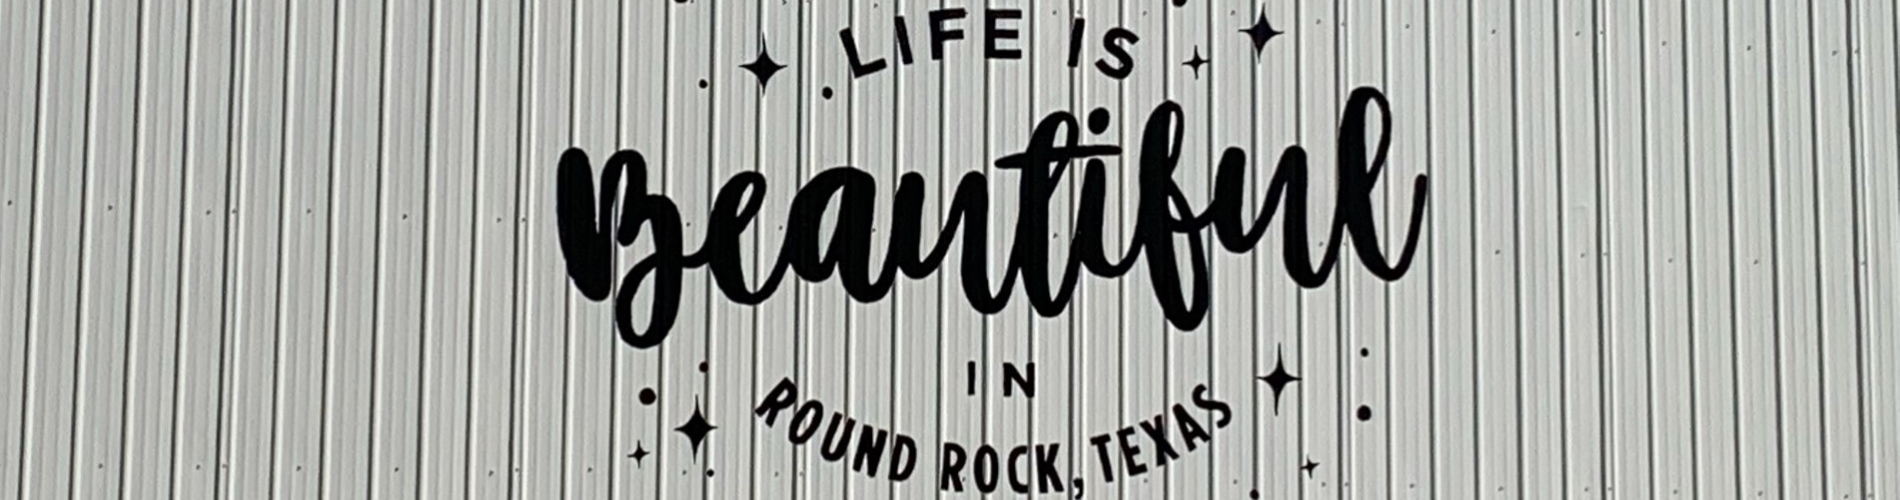 Life is Beautiful in Round Rock